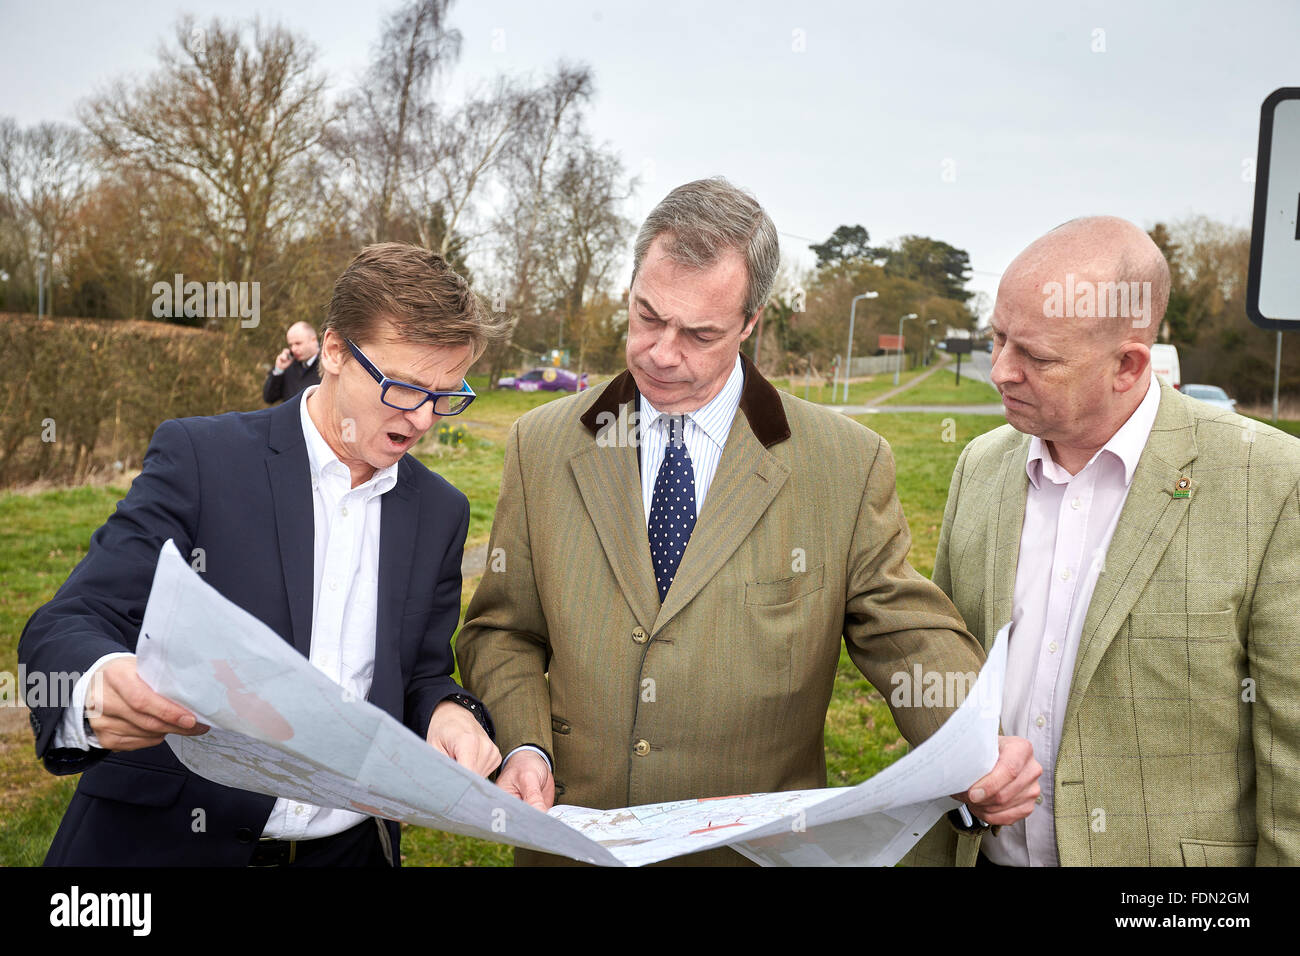 UKIP party leader Nigel Farage (C) pictured where HS2 will cross a major road in Stoke Mandeville with Chris Adams (R) and Phil Yerby (L) Stock Photo